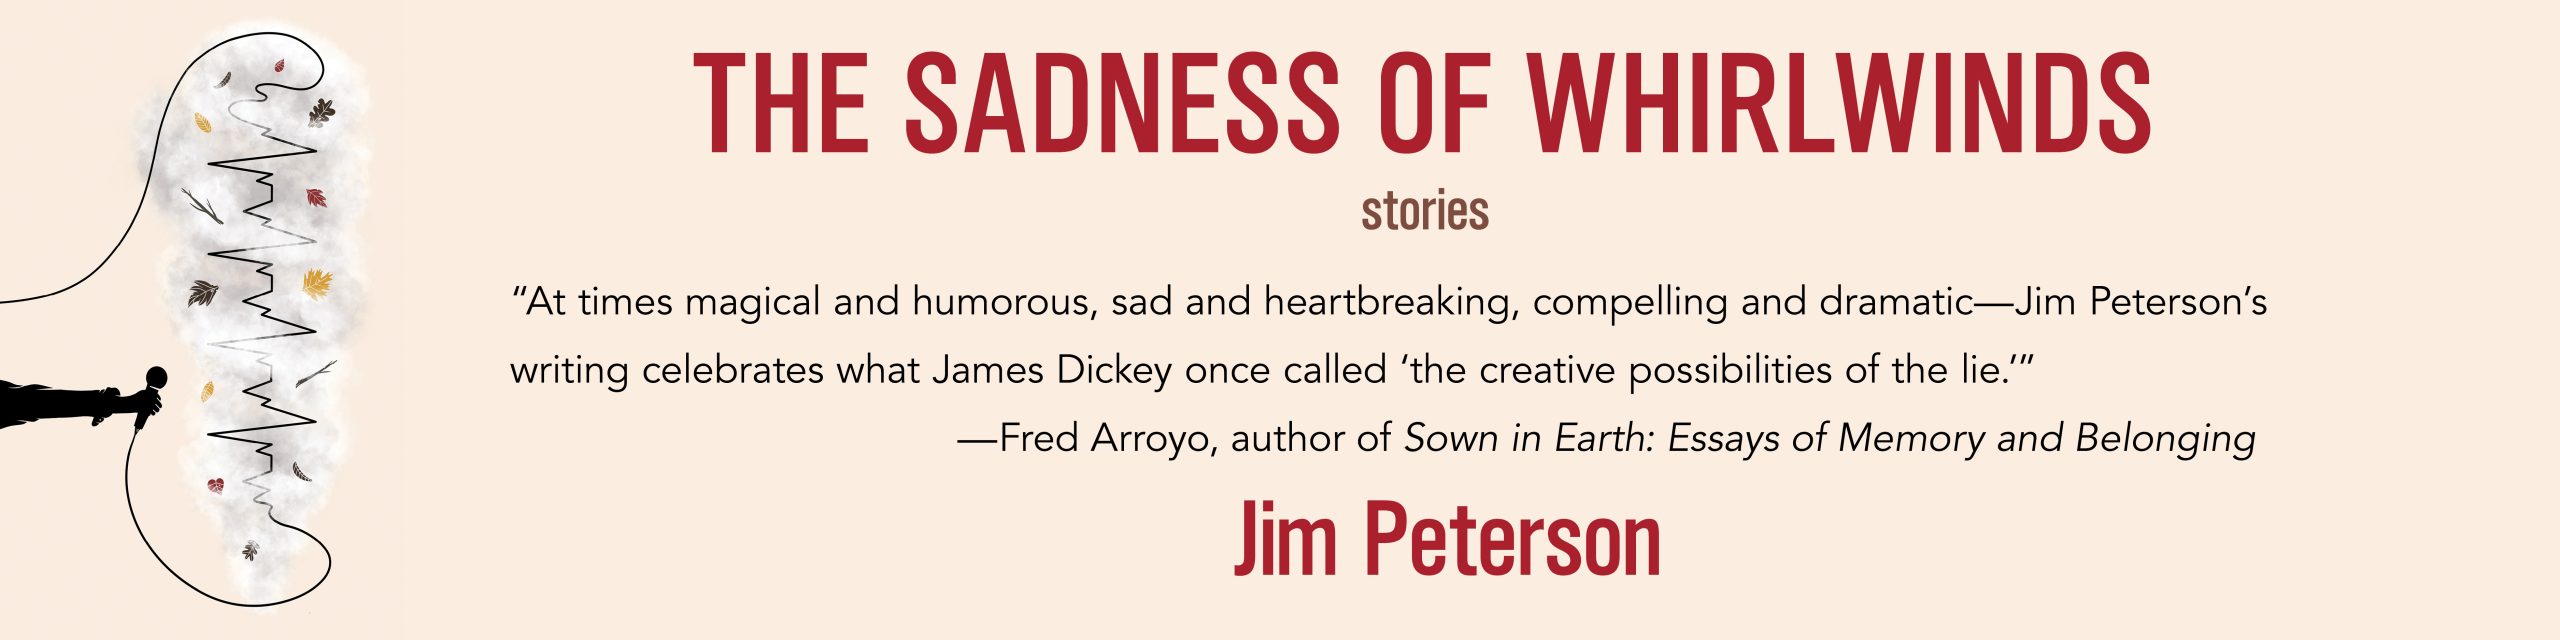 Promotional banner promoting The Sadness of Whirlwinds by Jim Peterson